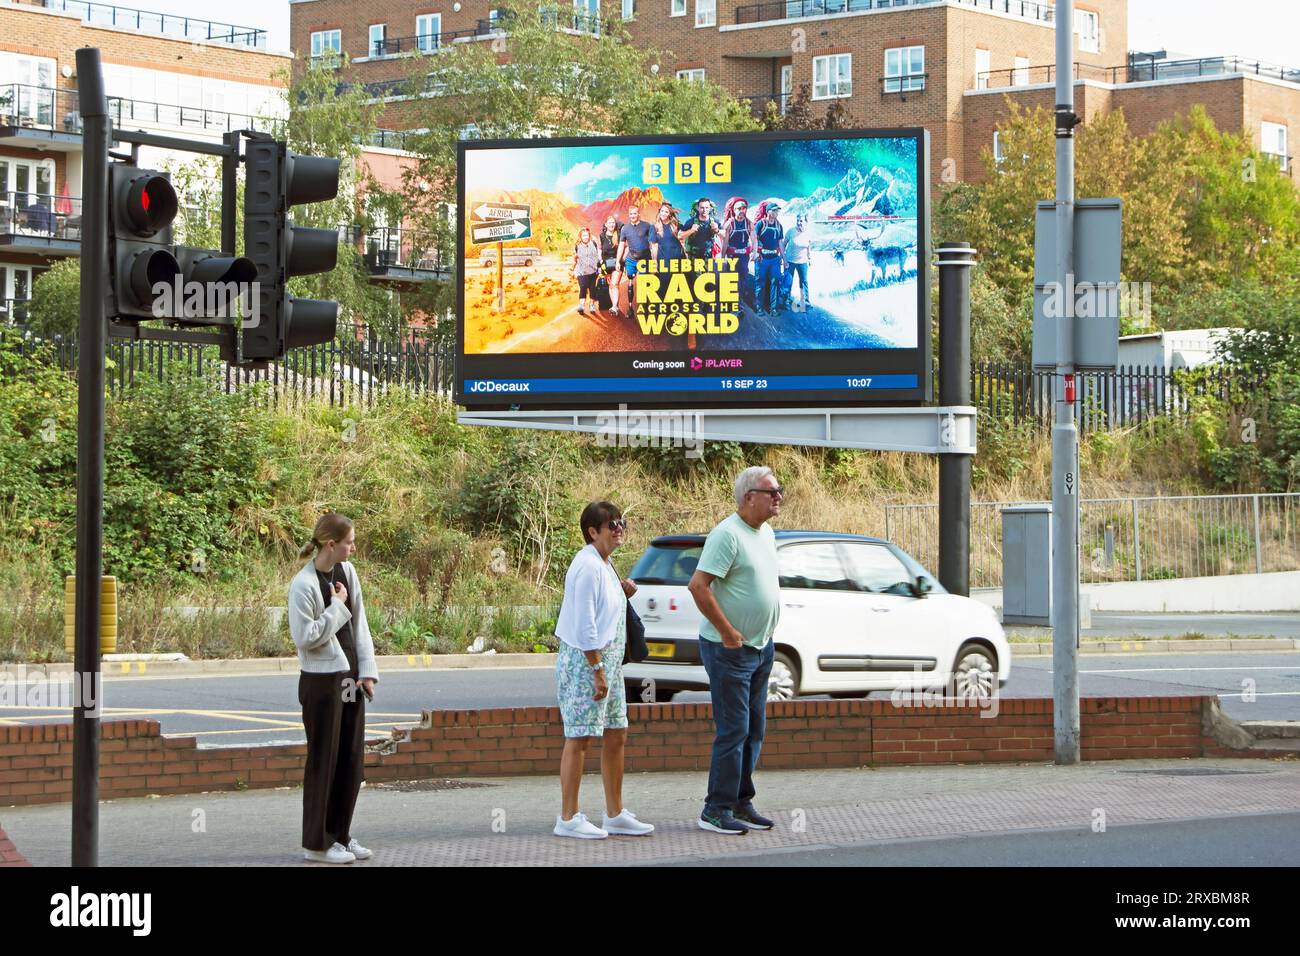 pedestrians wait to cross the road in front of a digital billboard advertising a bbc television programme, celebrity race across the world Stock Photo